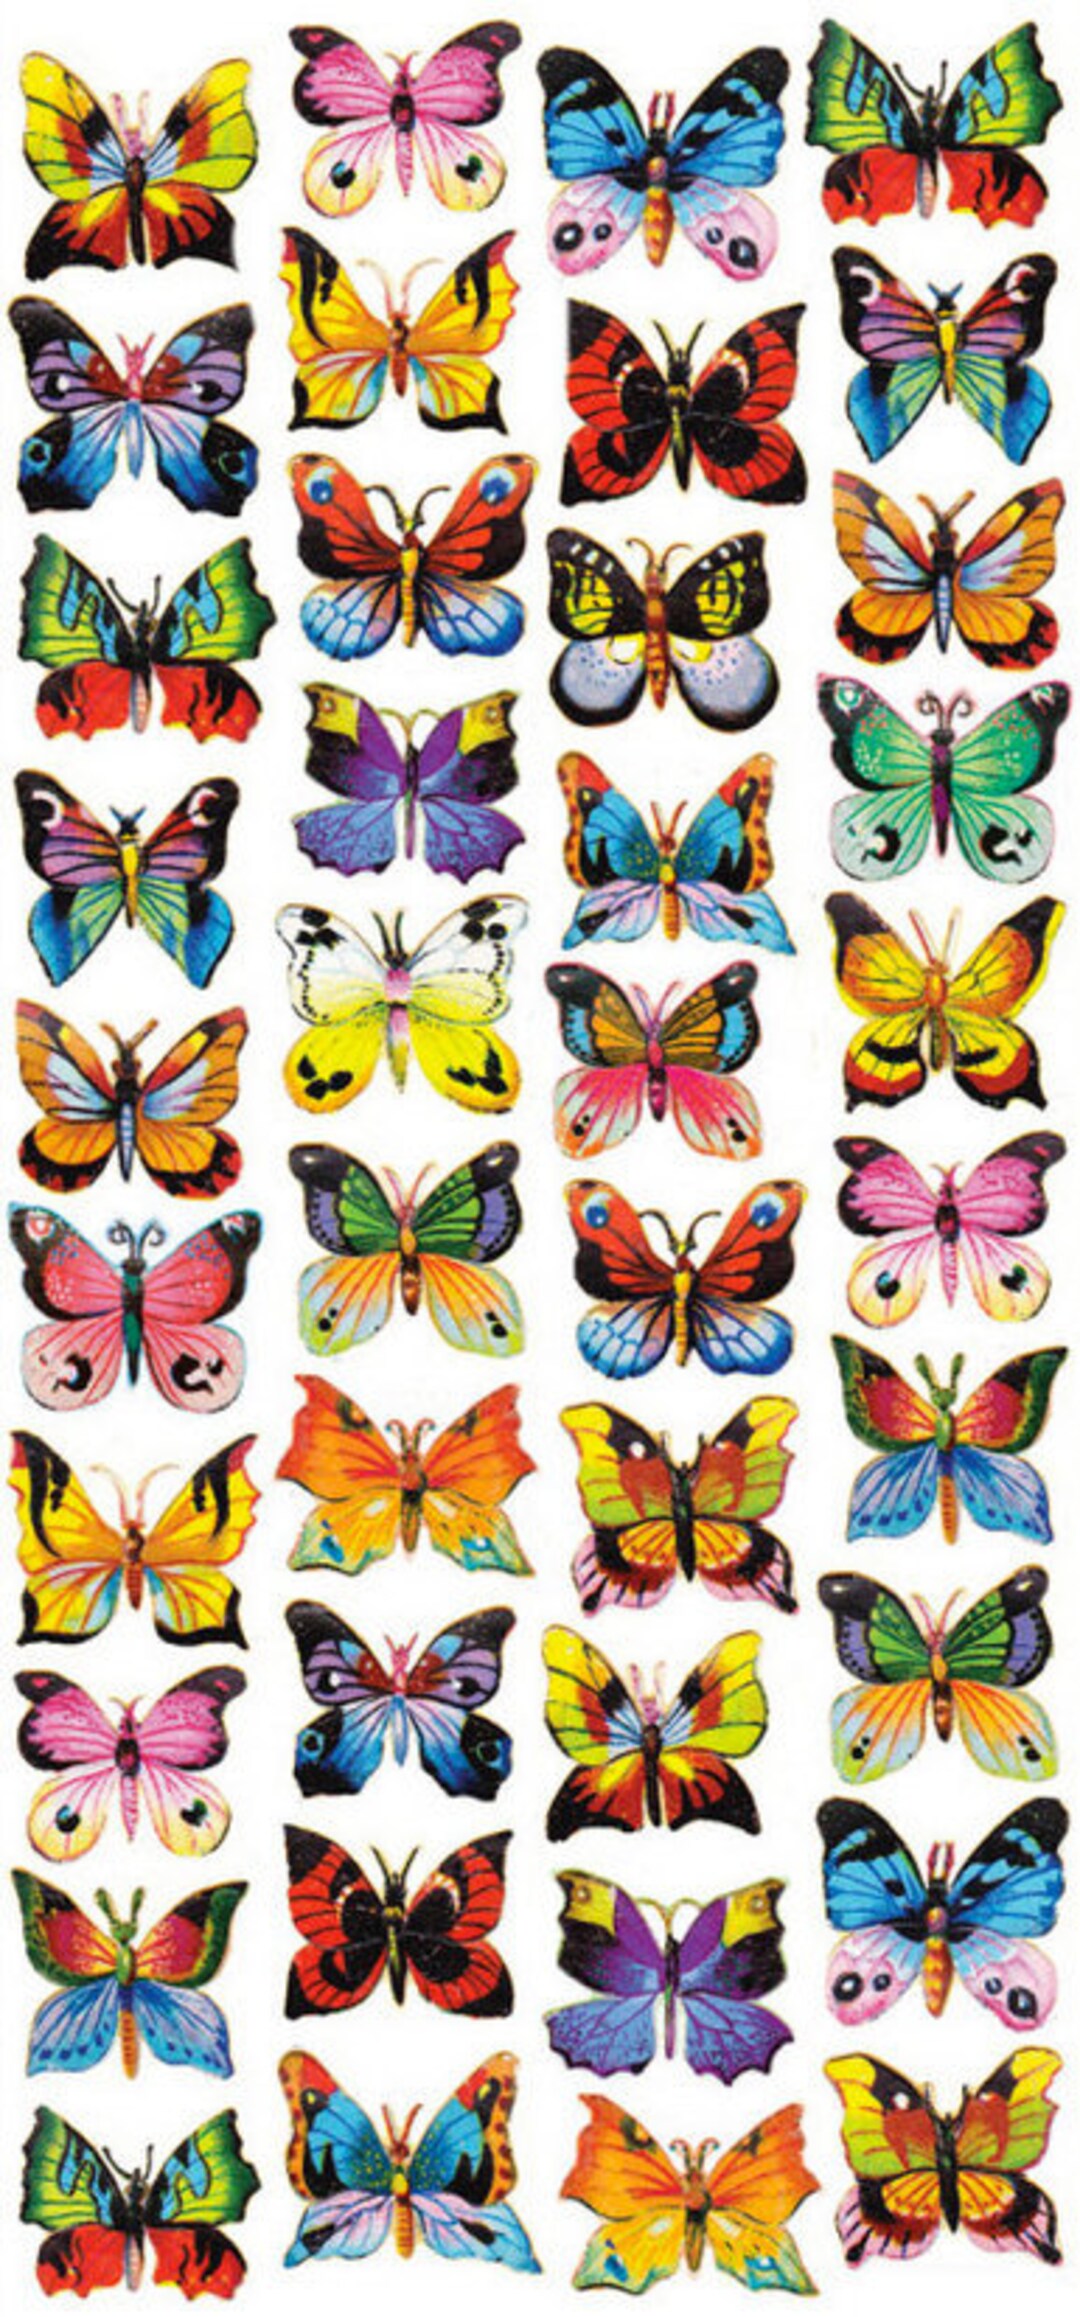 Small Butterfly Stickers, 50 Sheets Romantic Easy Self-Adhesive Note Paper  Stickers with Multi Color Butterflies Decals for Kids Scarpbooking Crafts